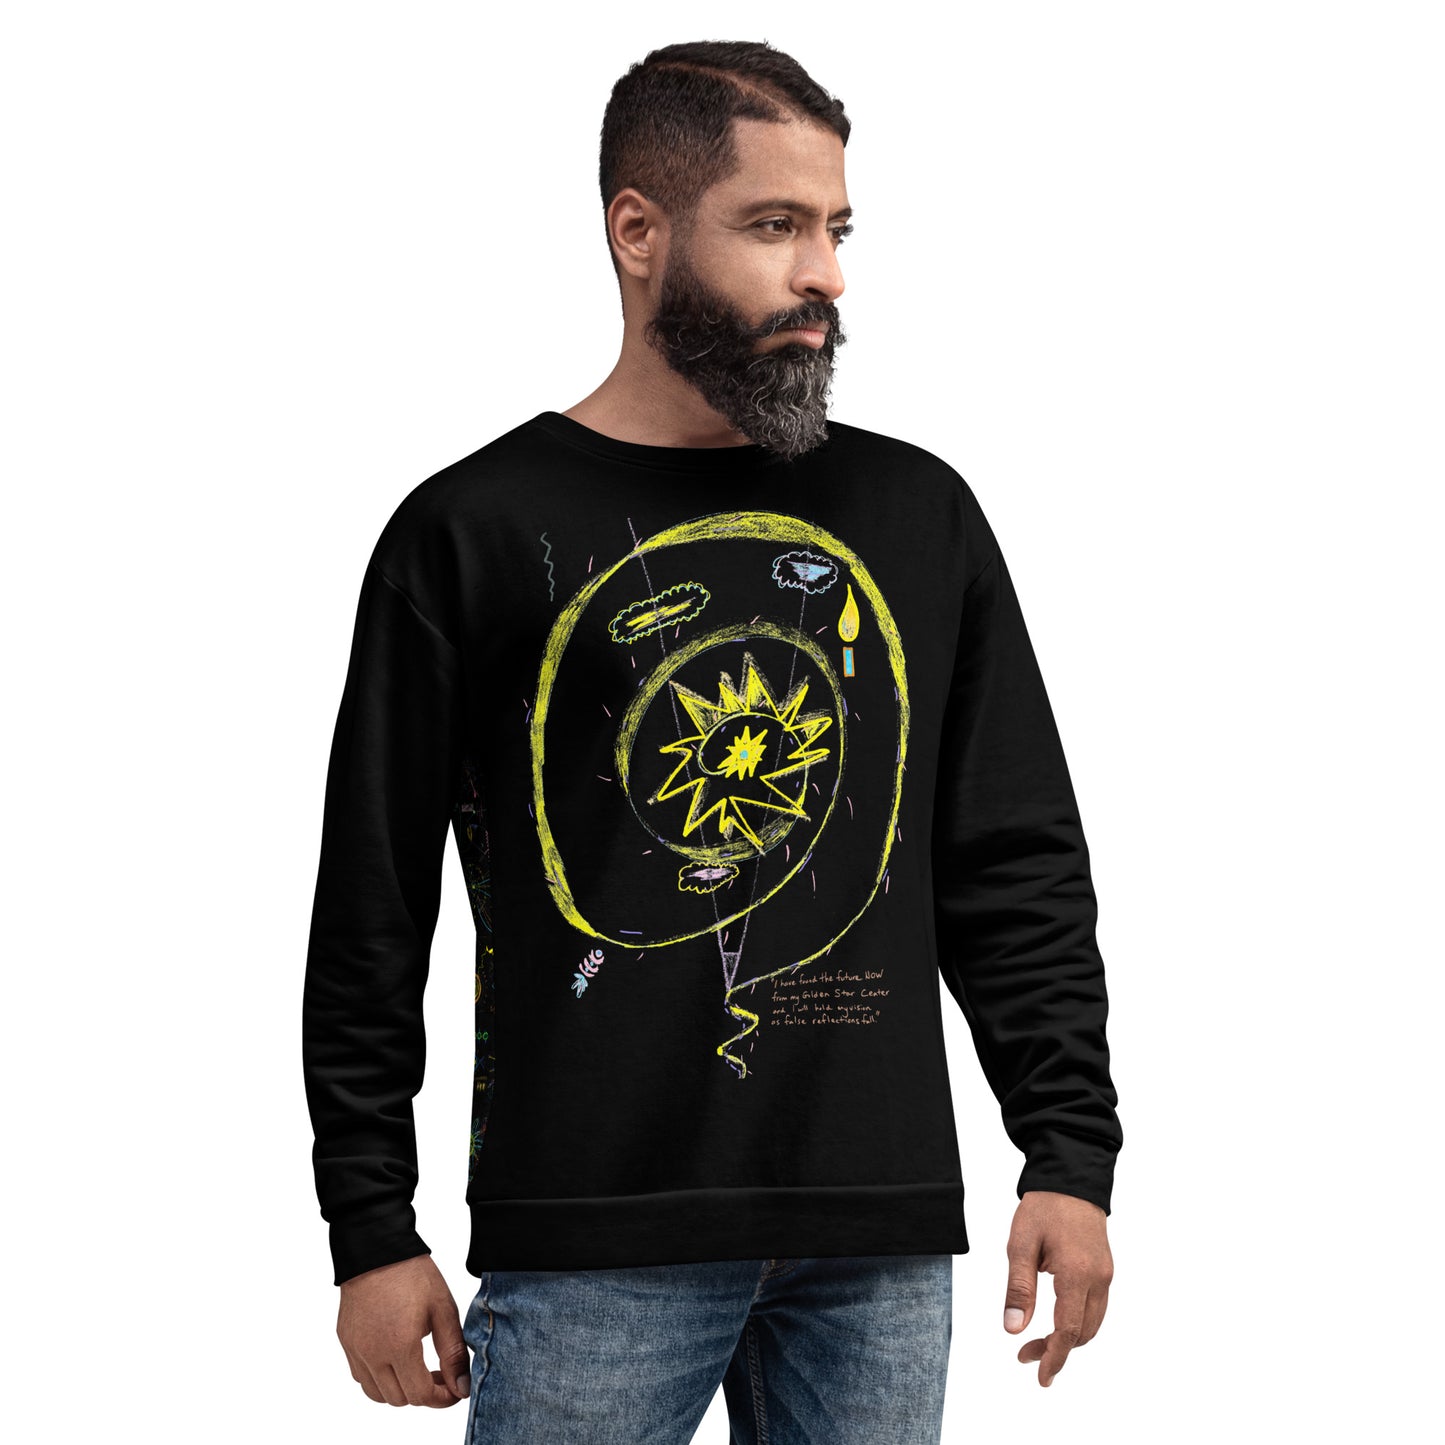 I have found the future NOW, from my Golden Star Center, and I will hold my vision, as false reflections fall. recycled unisex sweatshirt in black